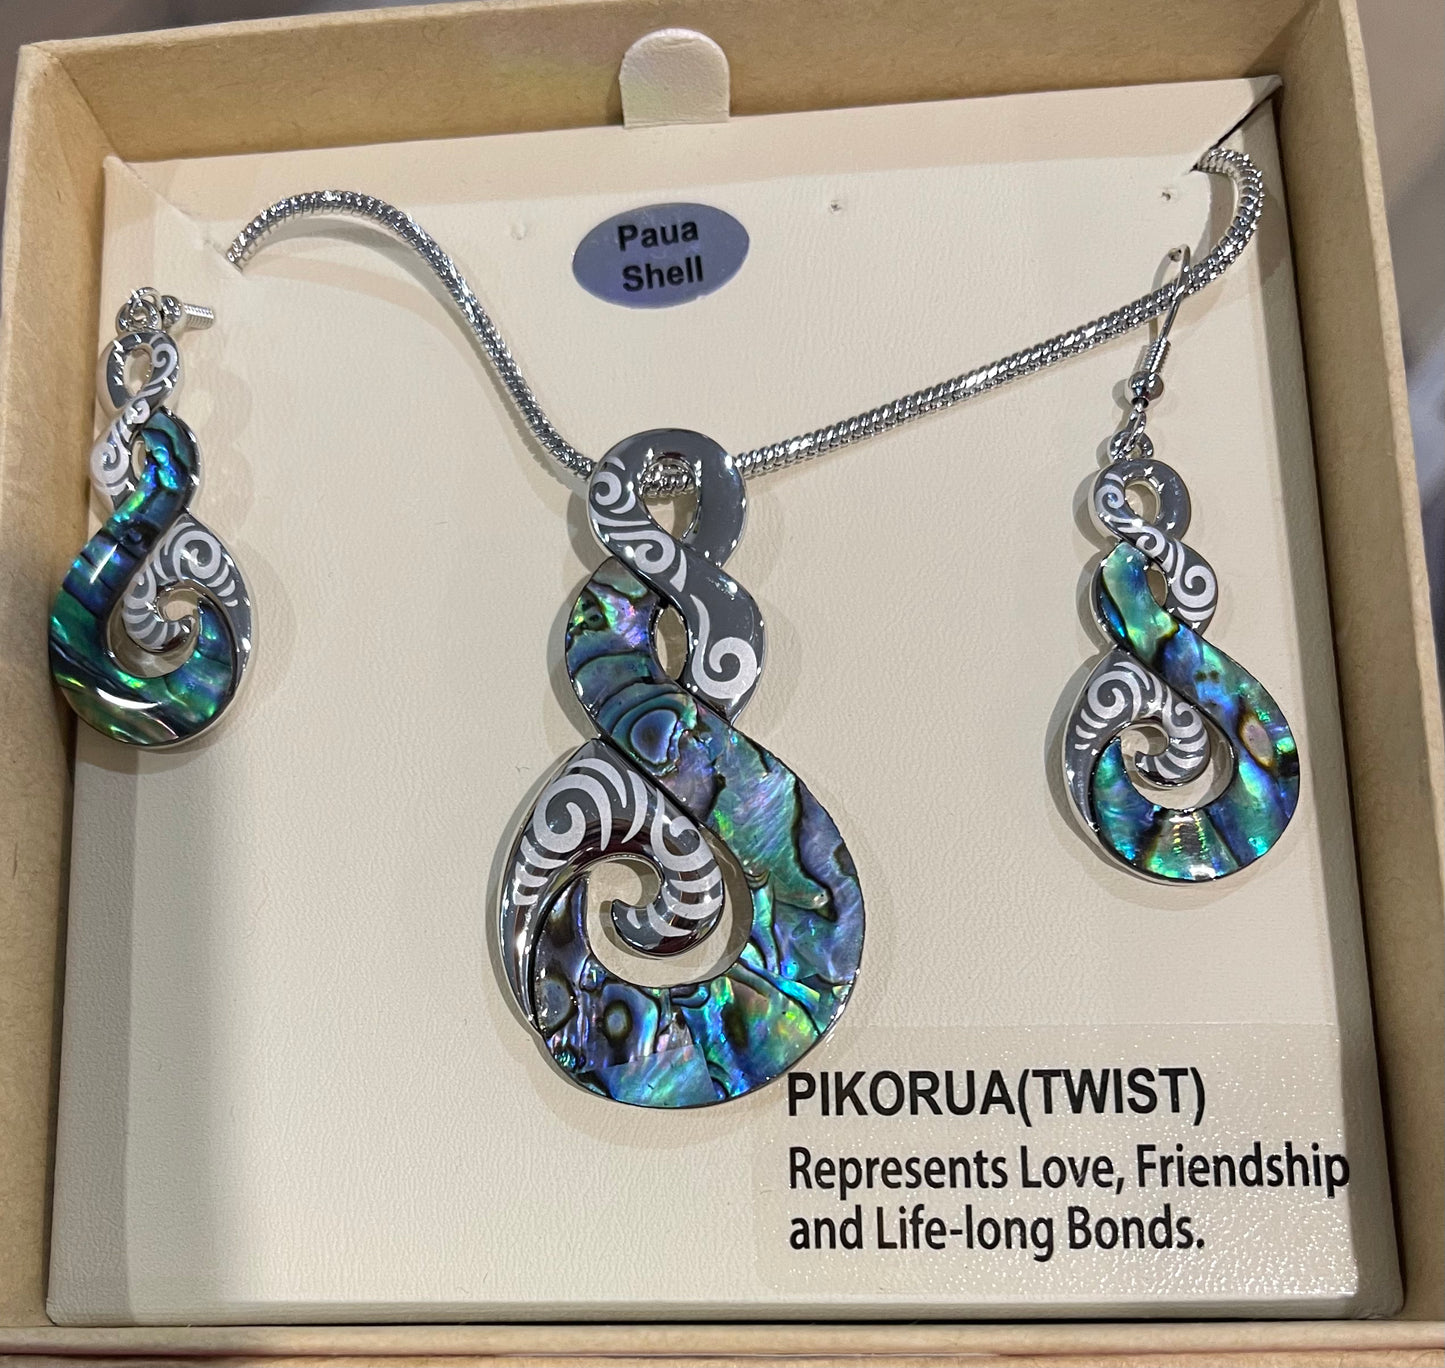 Paua Twist Necklace and Earrings